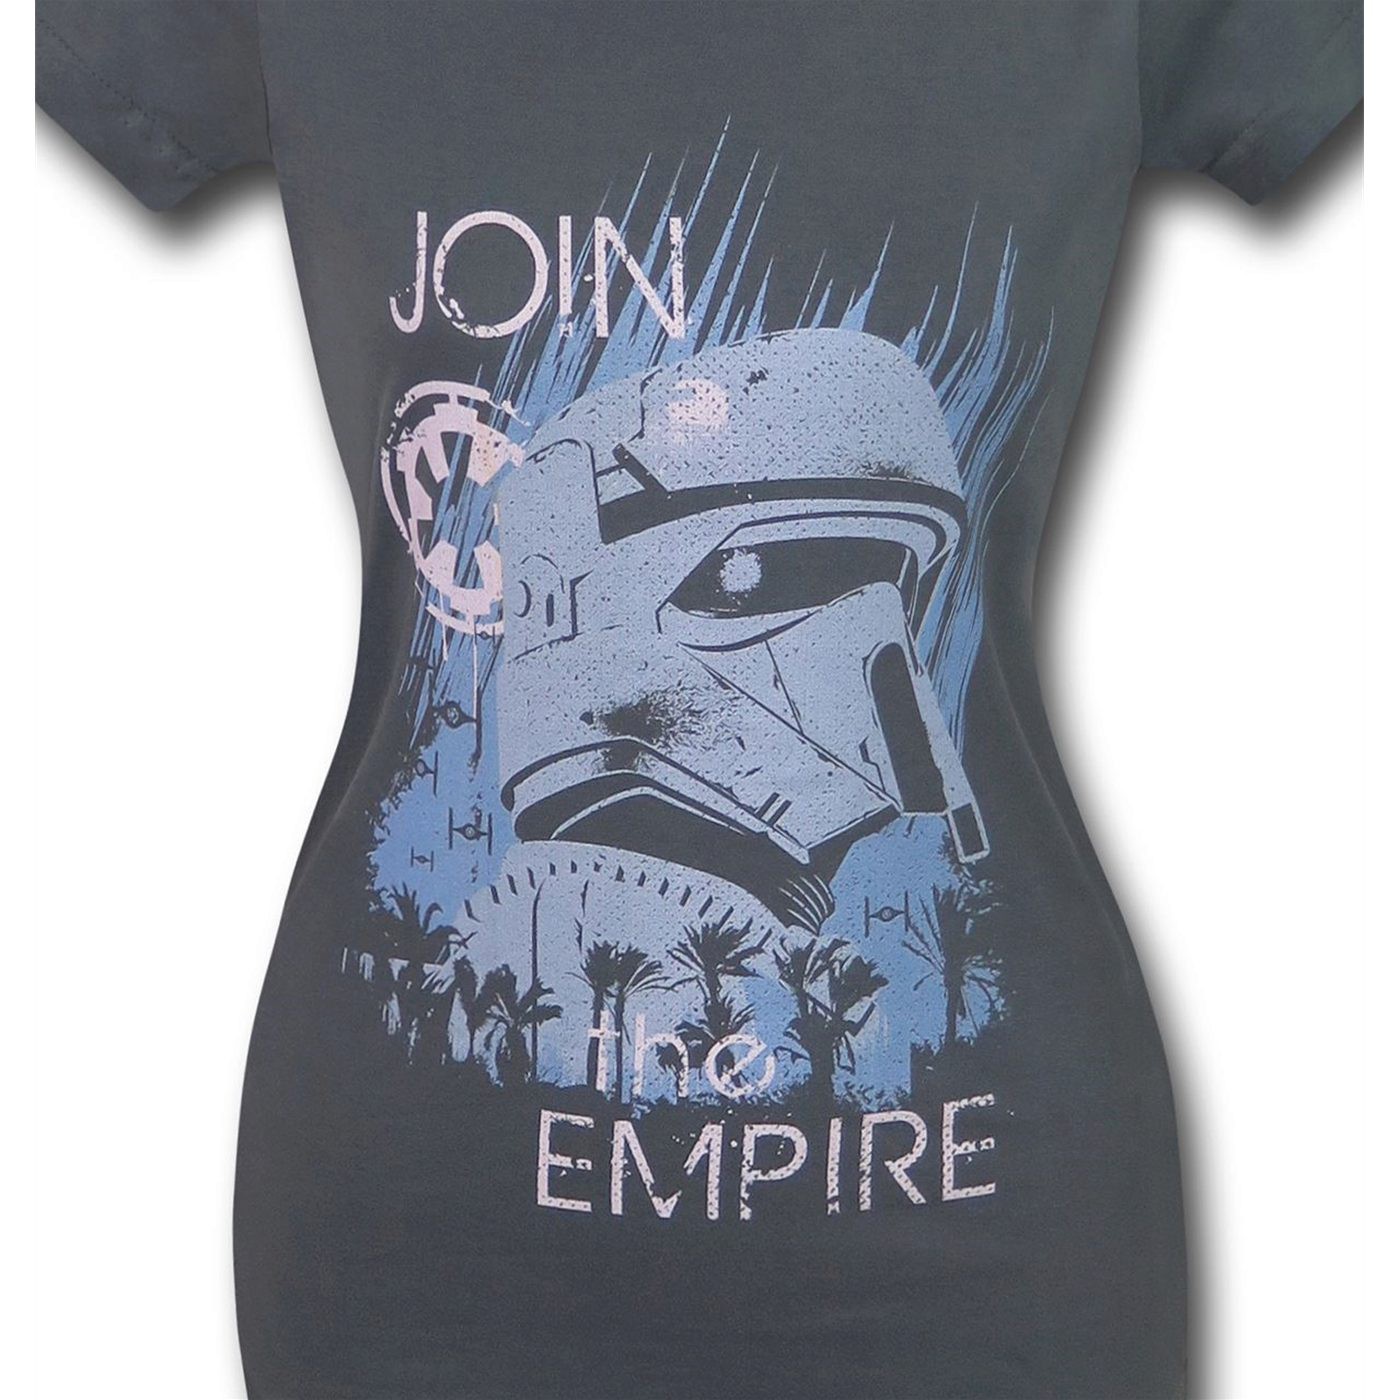 Star Wars Rogue One Join the Empire Women's T-Shirt